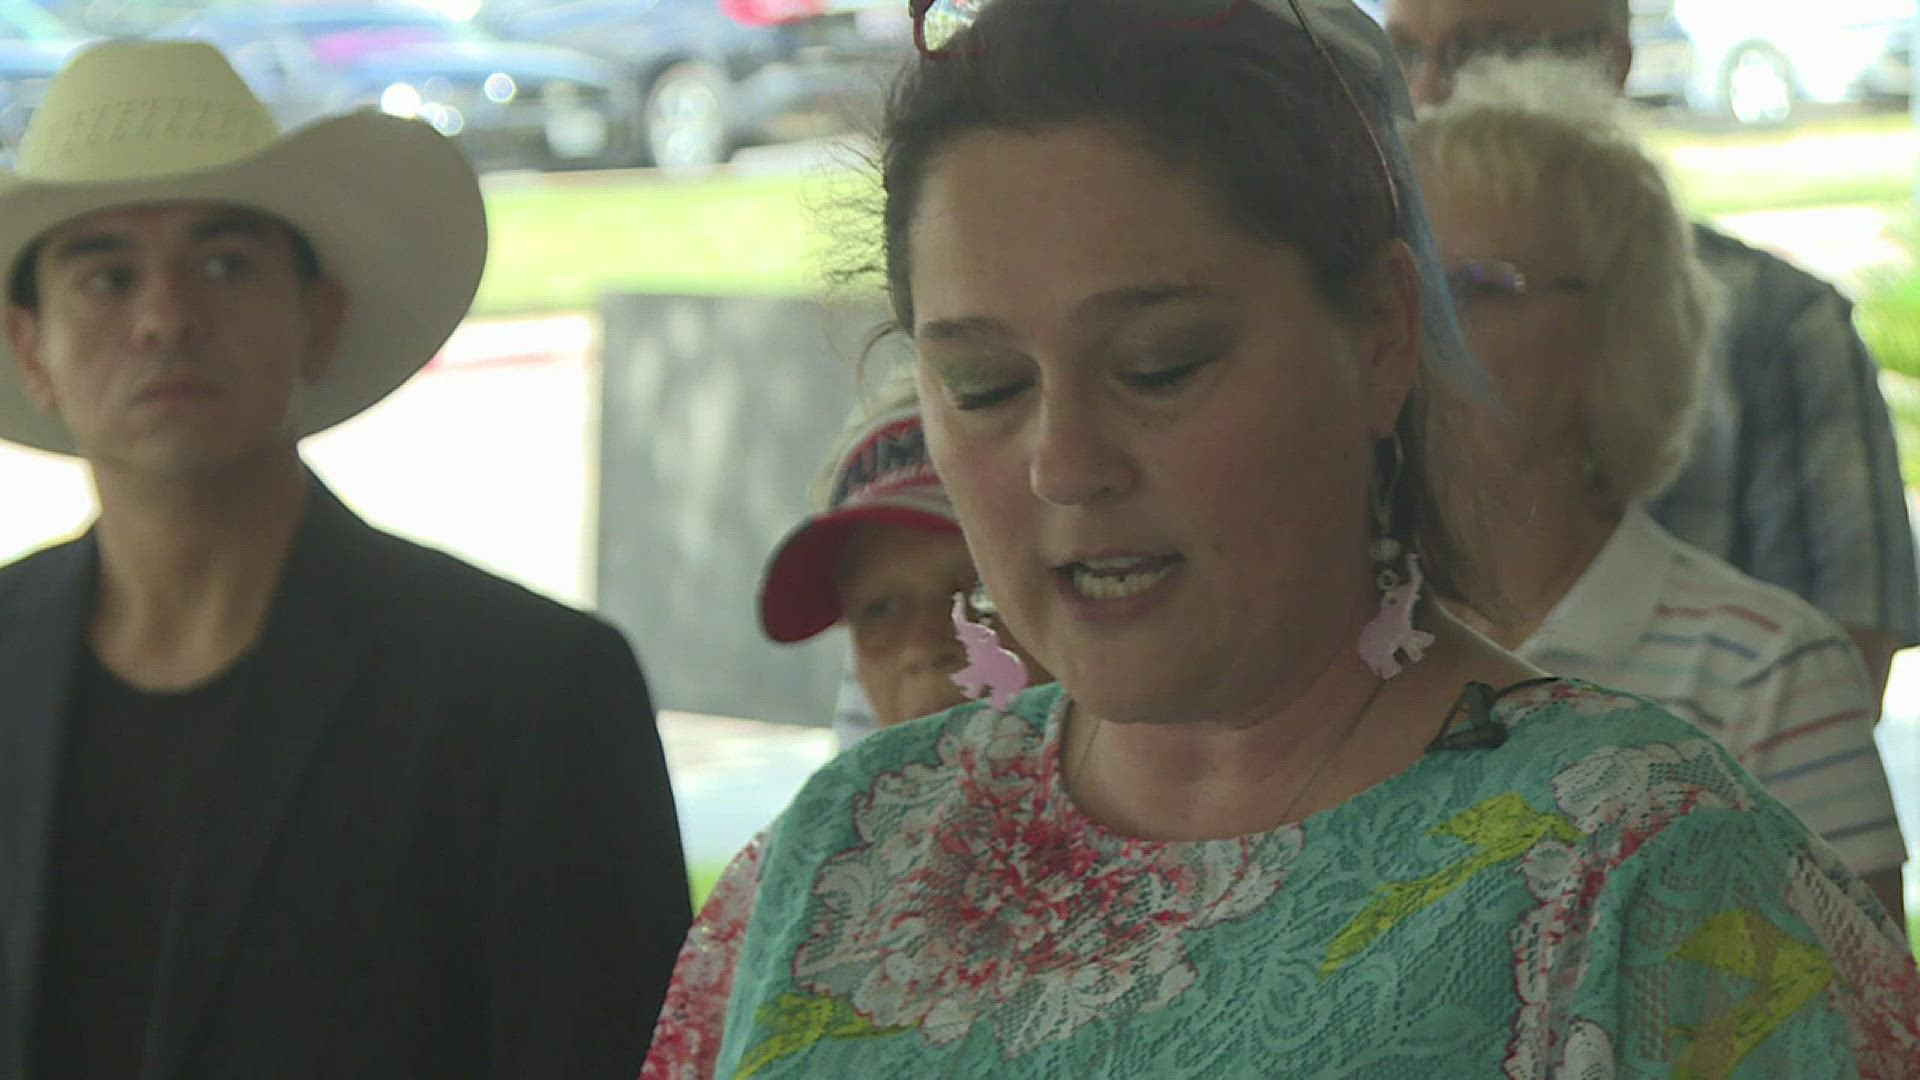 Local Republican Party Chair Barbie Baker spoke to members of multiple organizations in front of the courthouse.